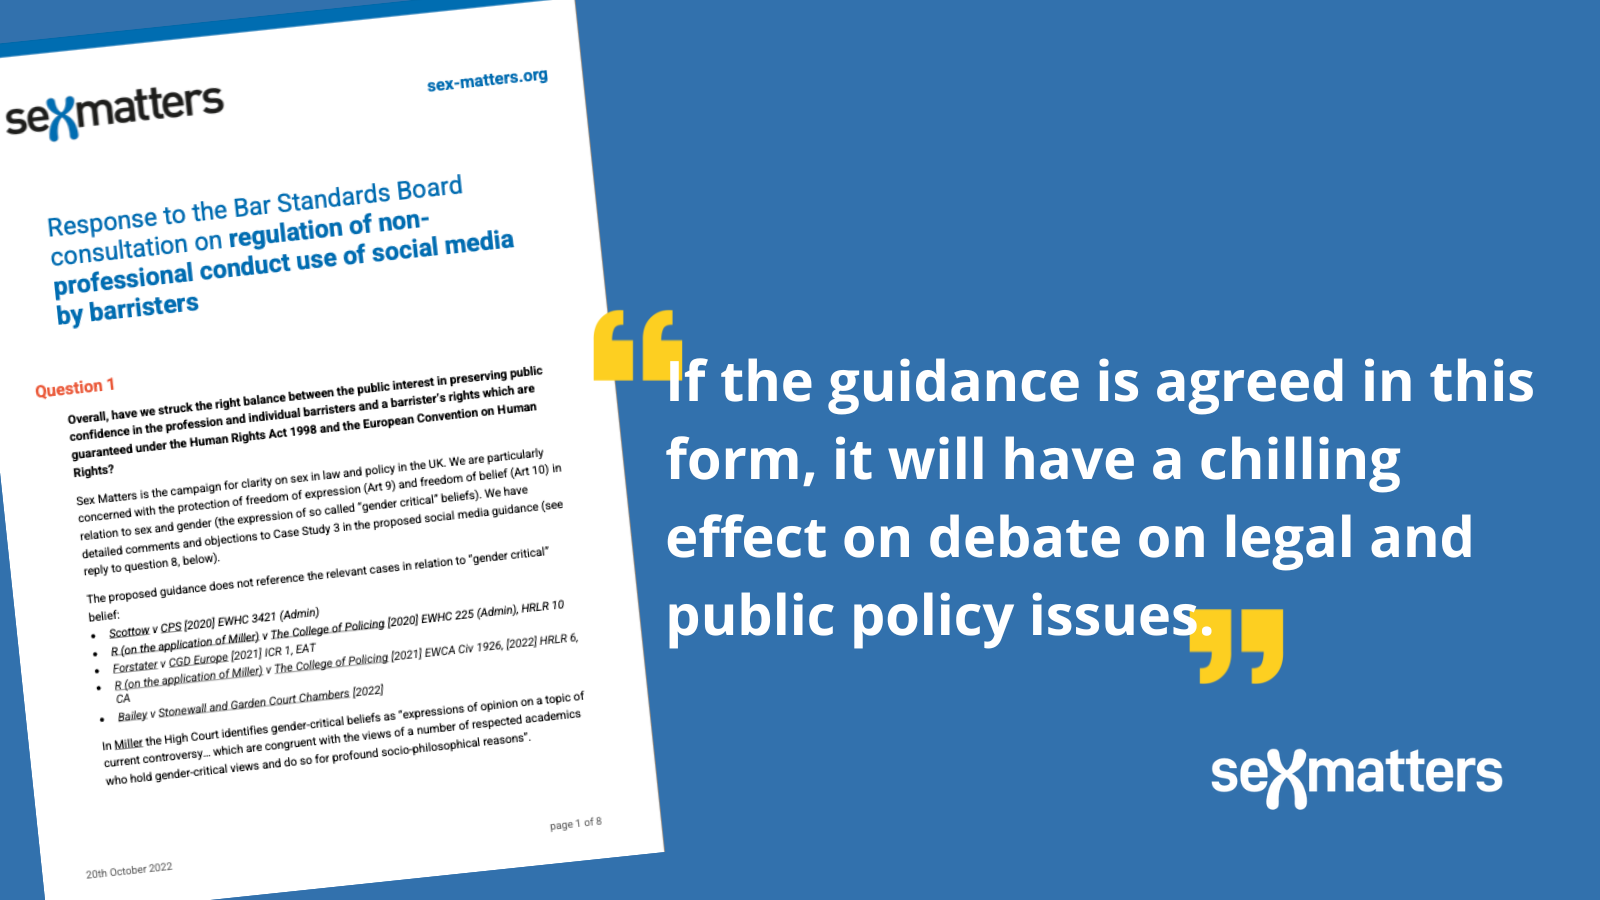 If the guidance is agreed in this form, it will have a chilling effect on debate on legal and public policy issues.